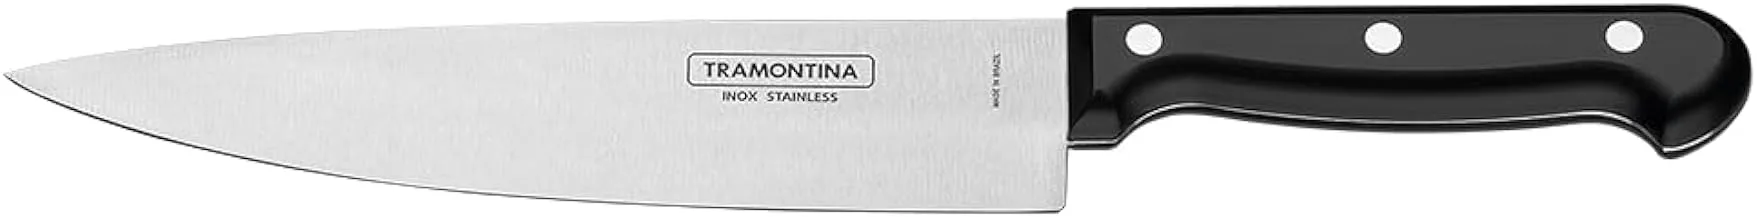 Tramontina Ultracorte 7 Inches Chef Knife with Stainless Steel Blade and Black Polypropylene Handle